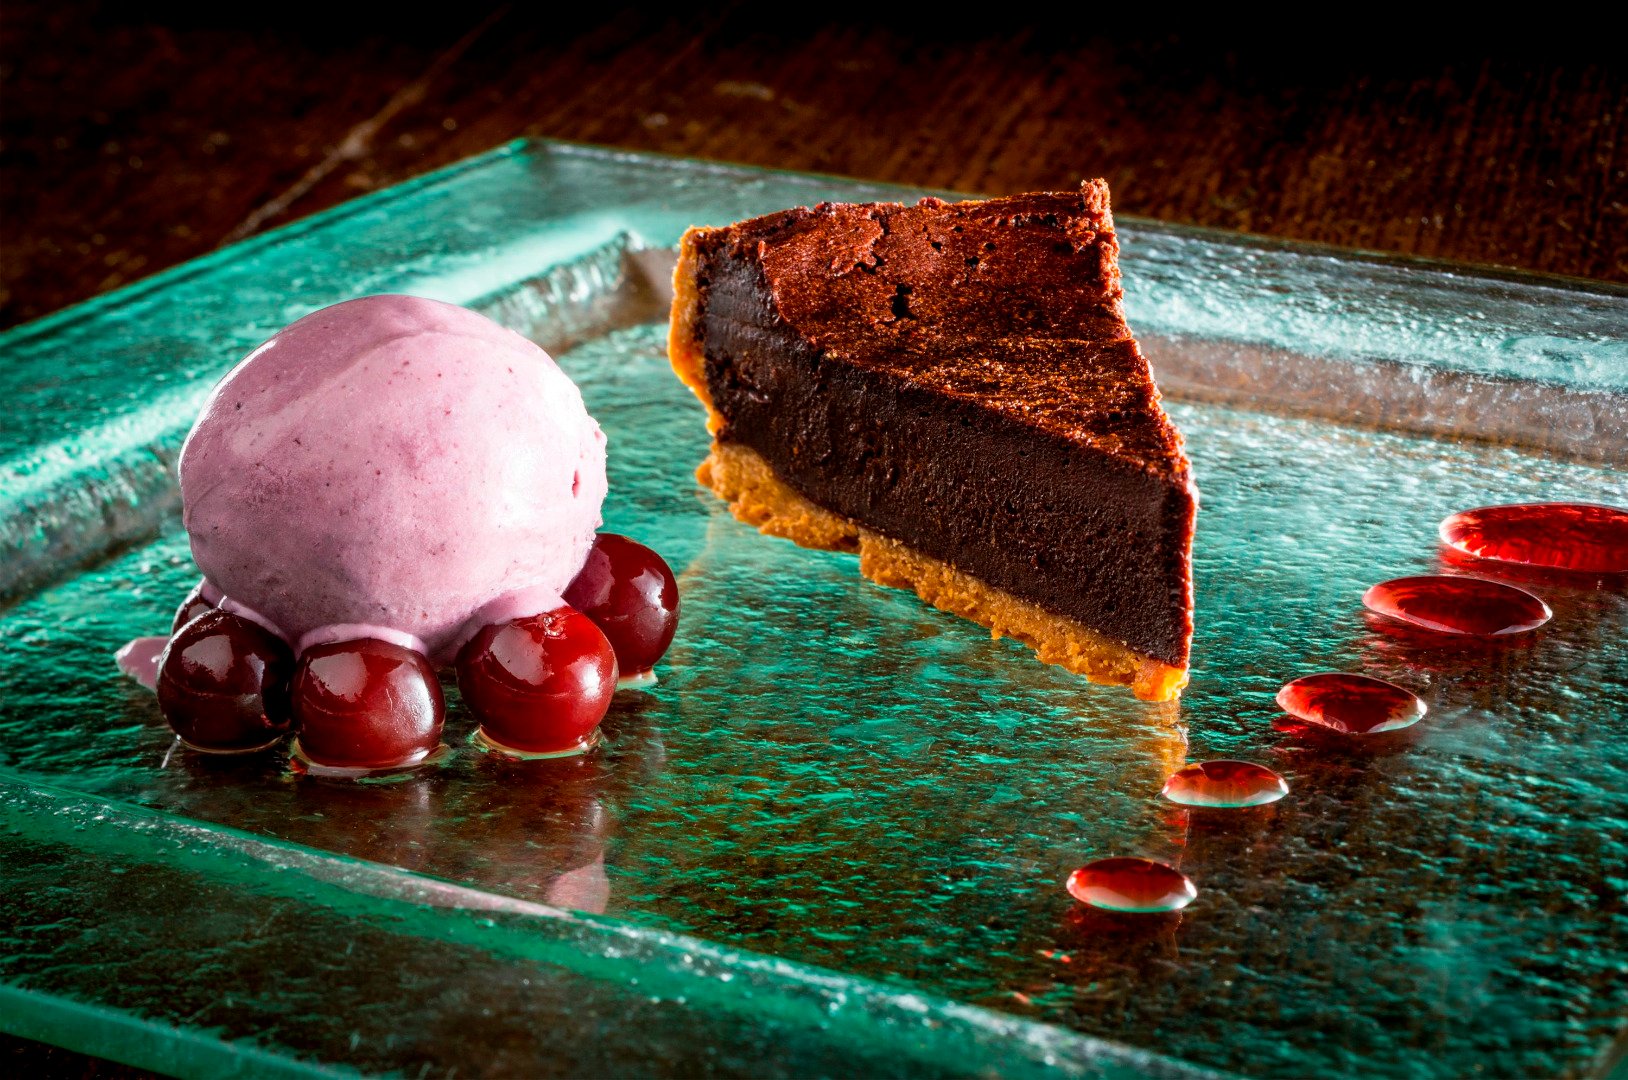 Image name homemade chocolate tart with cherry ice cream cherries the blue lion inn east witton the good pub guide inn of the year 20141 the 28 image from the post Eating out in the Yorkshire Dales in Yorkshire.com.